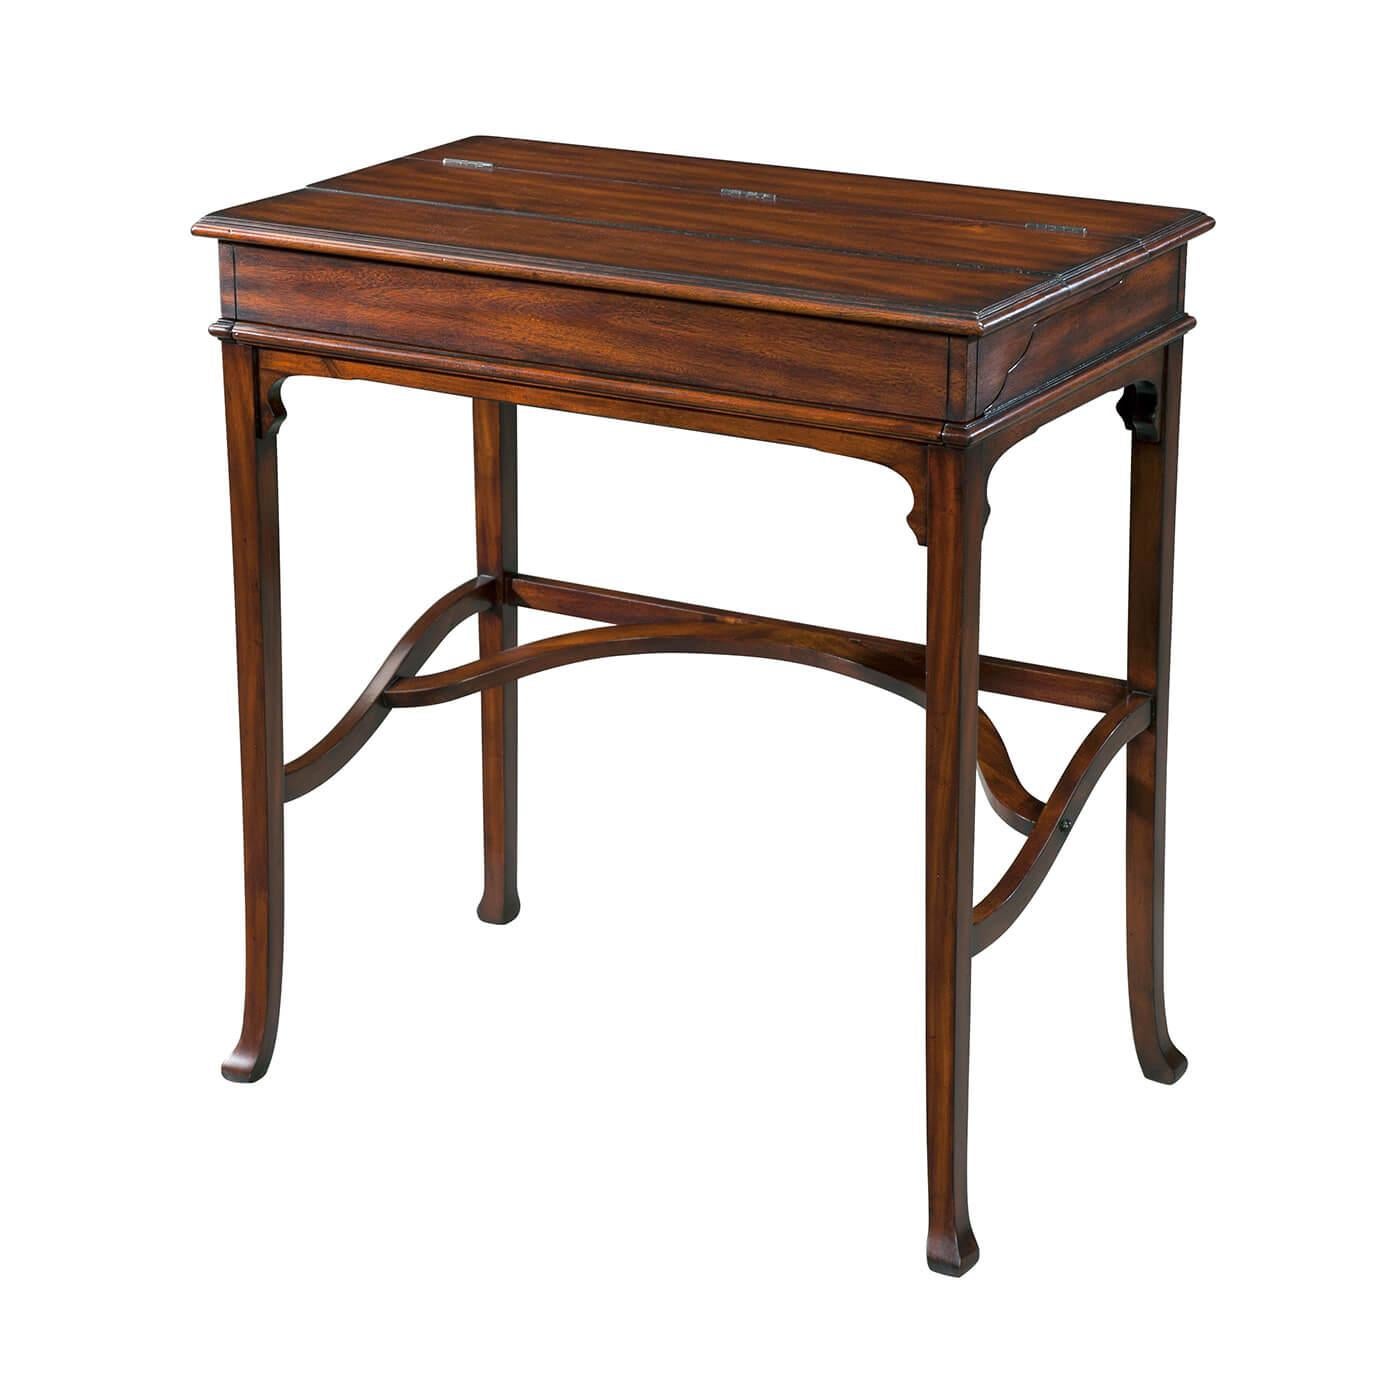 A 19th-century style Campaign desk, the flip-top revealing a fitted interior, slide-out tooled leather writing surface, raised on splayed legs with a stretcher.

Dimensions: 29.25